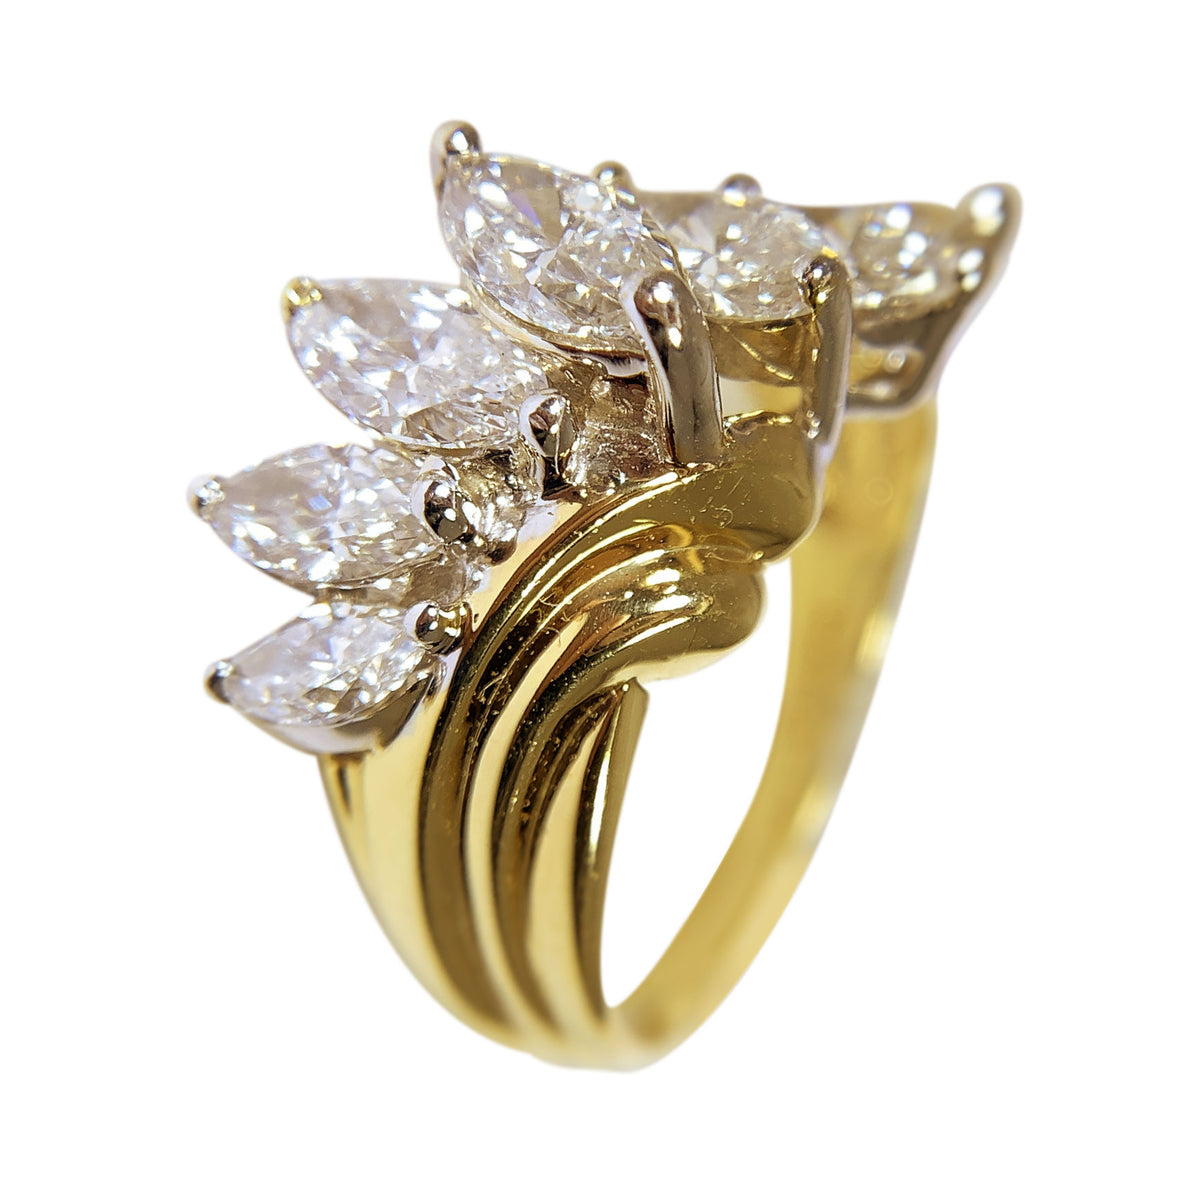 14 KT YELLOW GOLD MARQUISE DIAMONDS RING - 2.03 CT